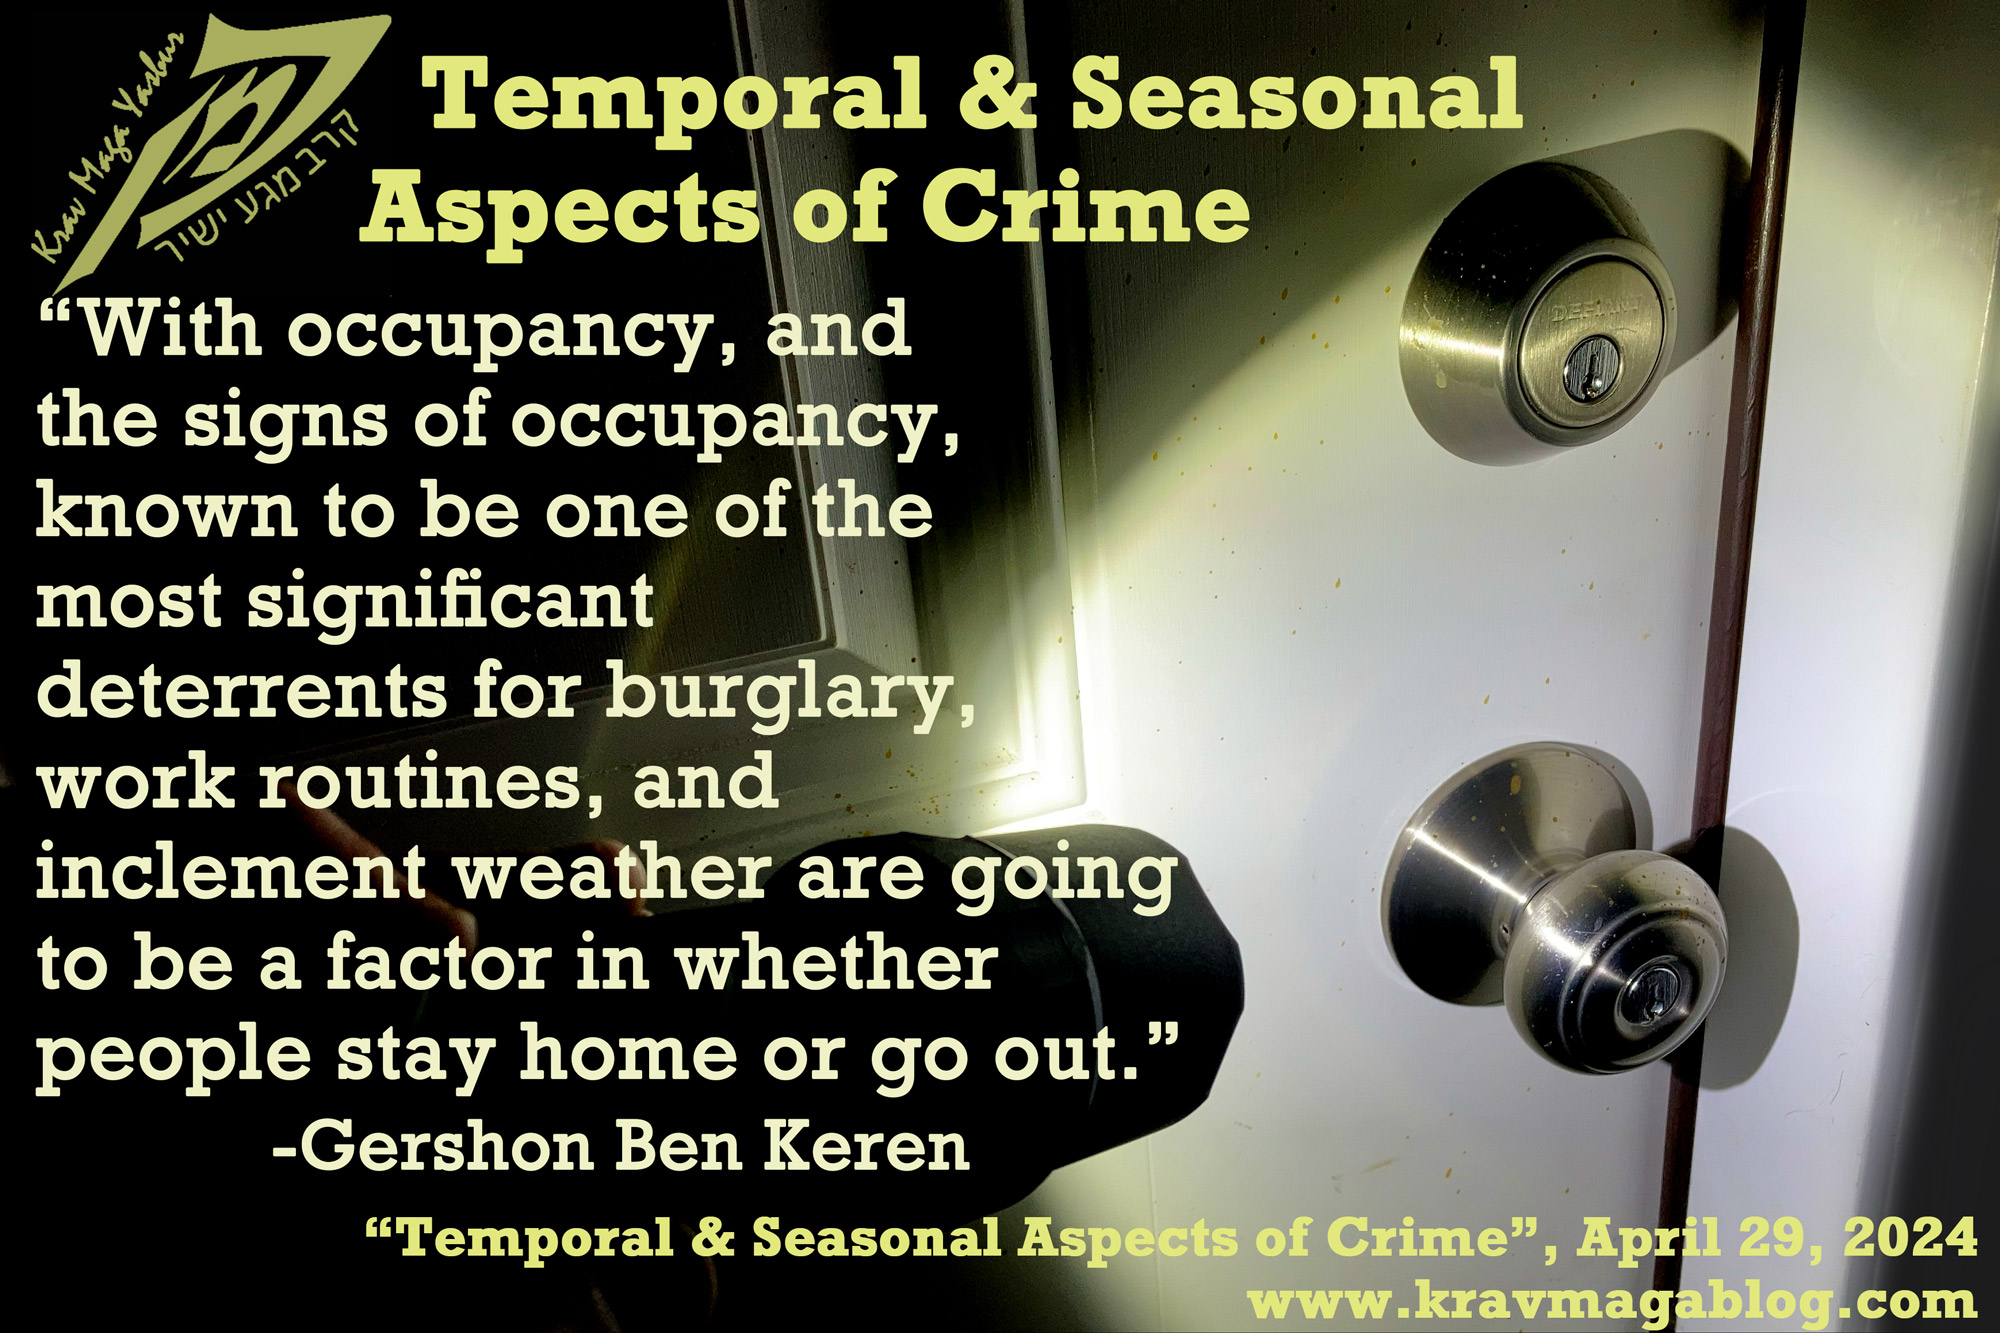 Blog About Temporal & Seasonal Aspects of Crime